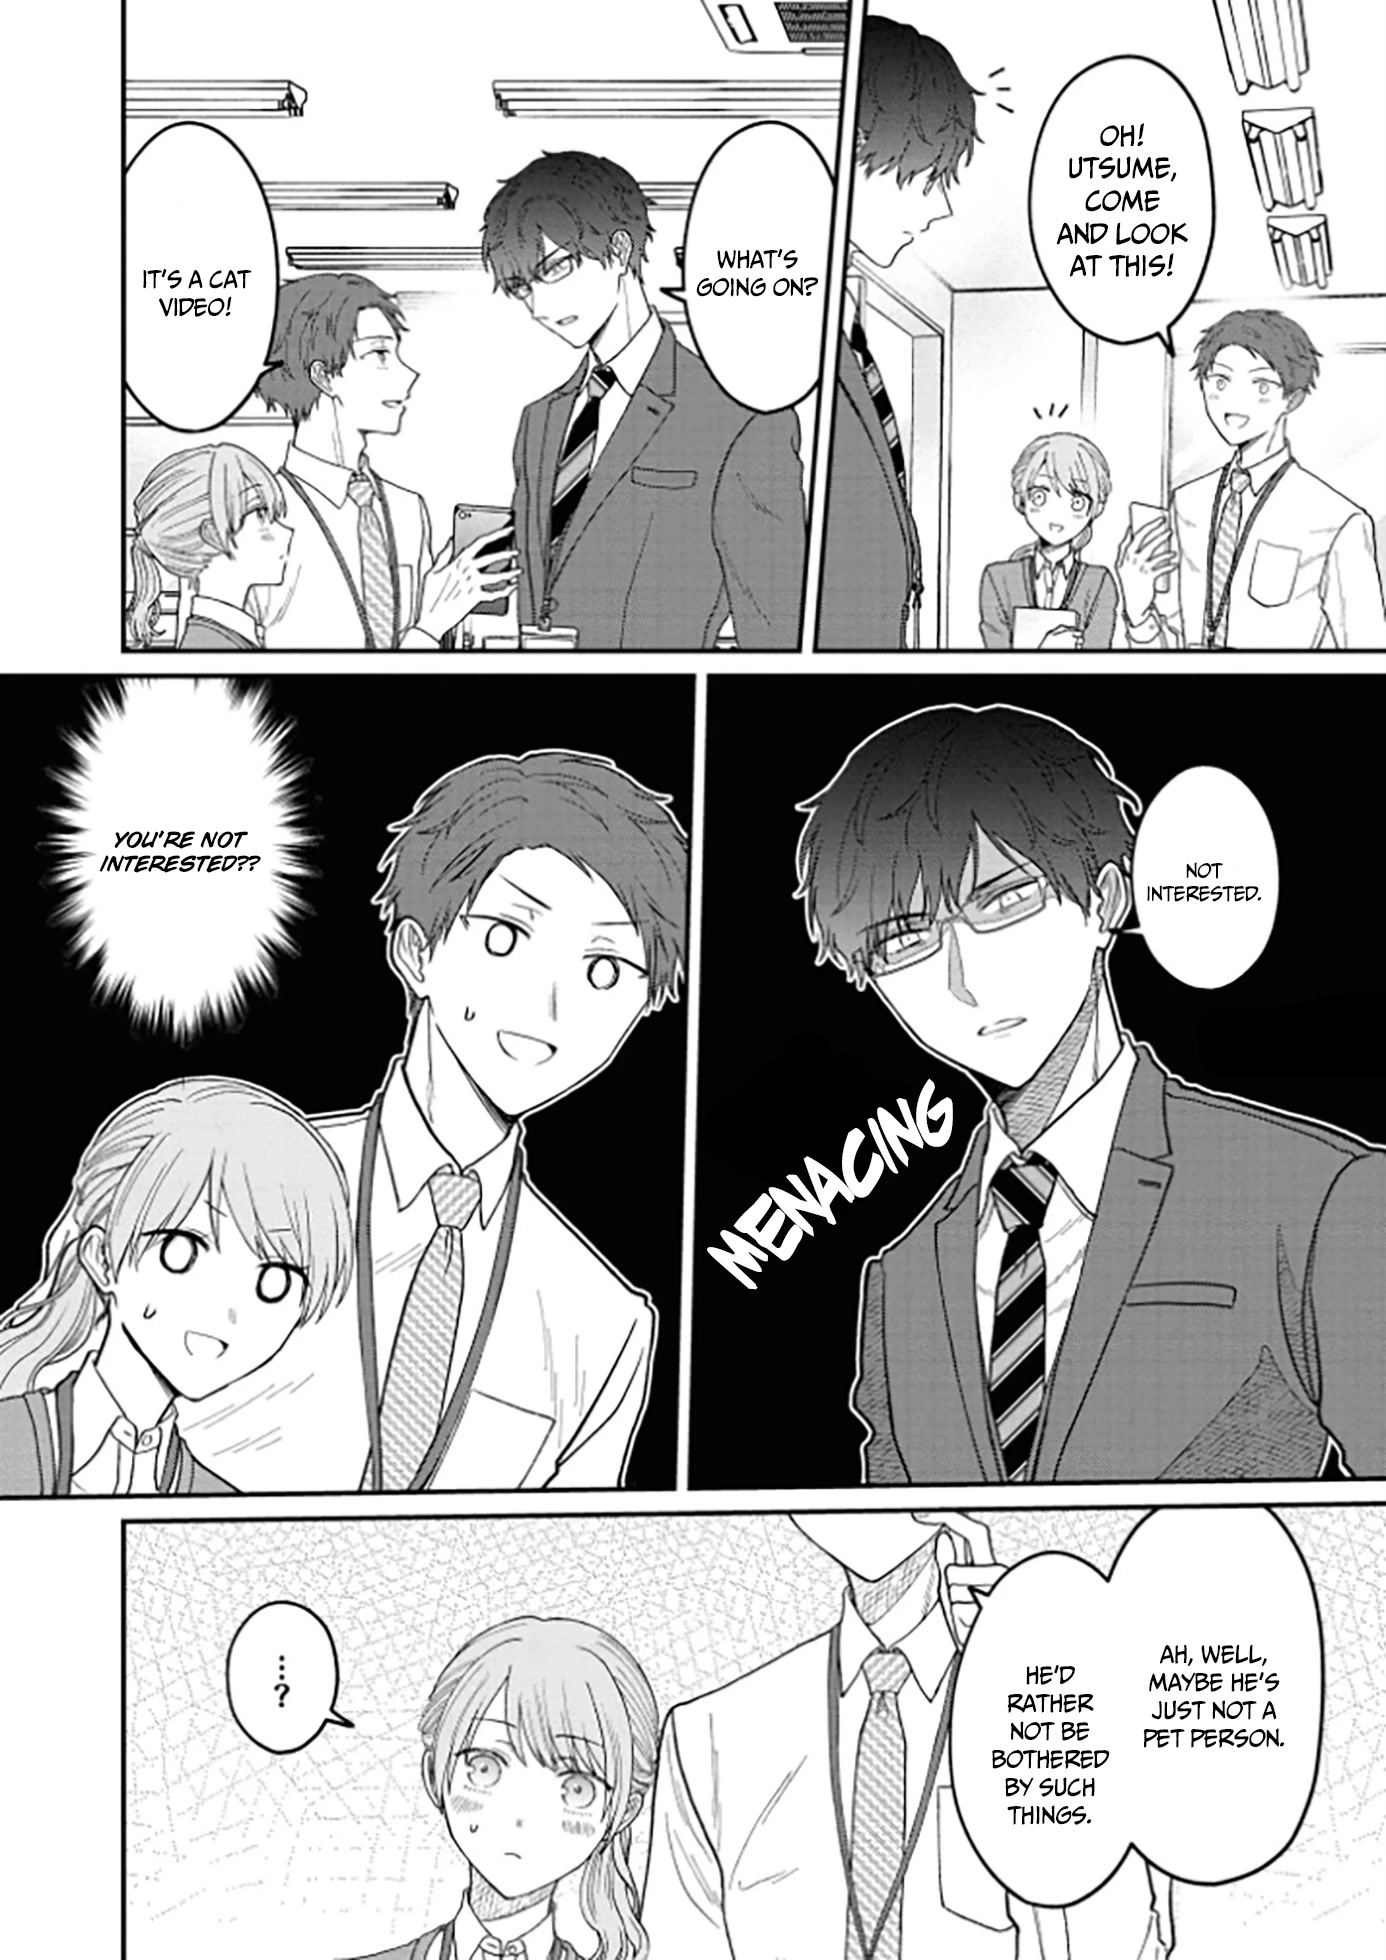 The New-Hire Who Could "Read" Emotions and the Unsociable Senpai - chapter 6 - #2